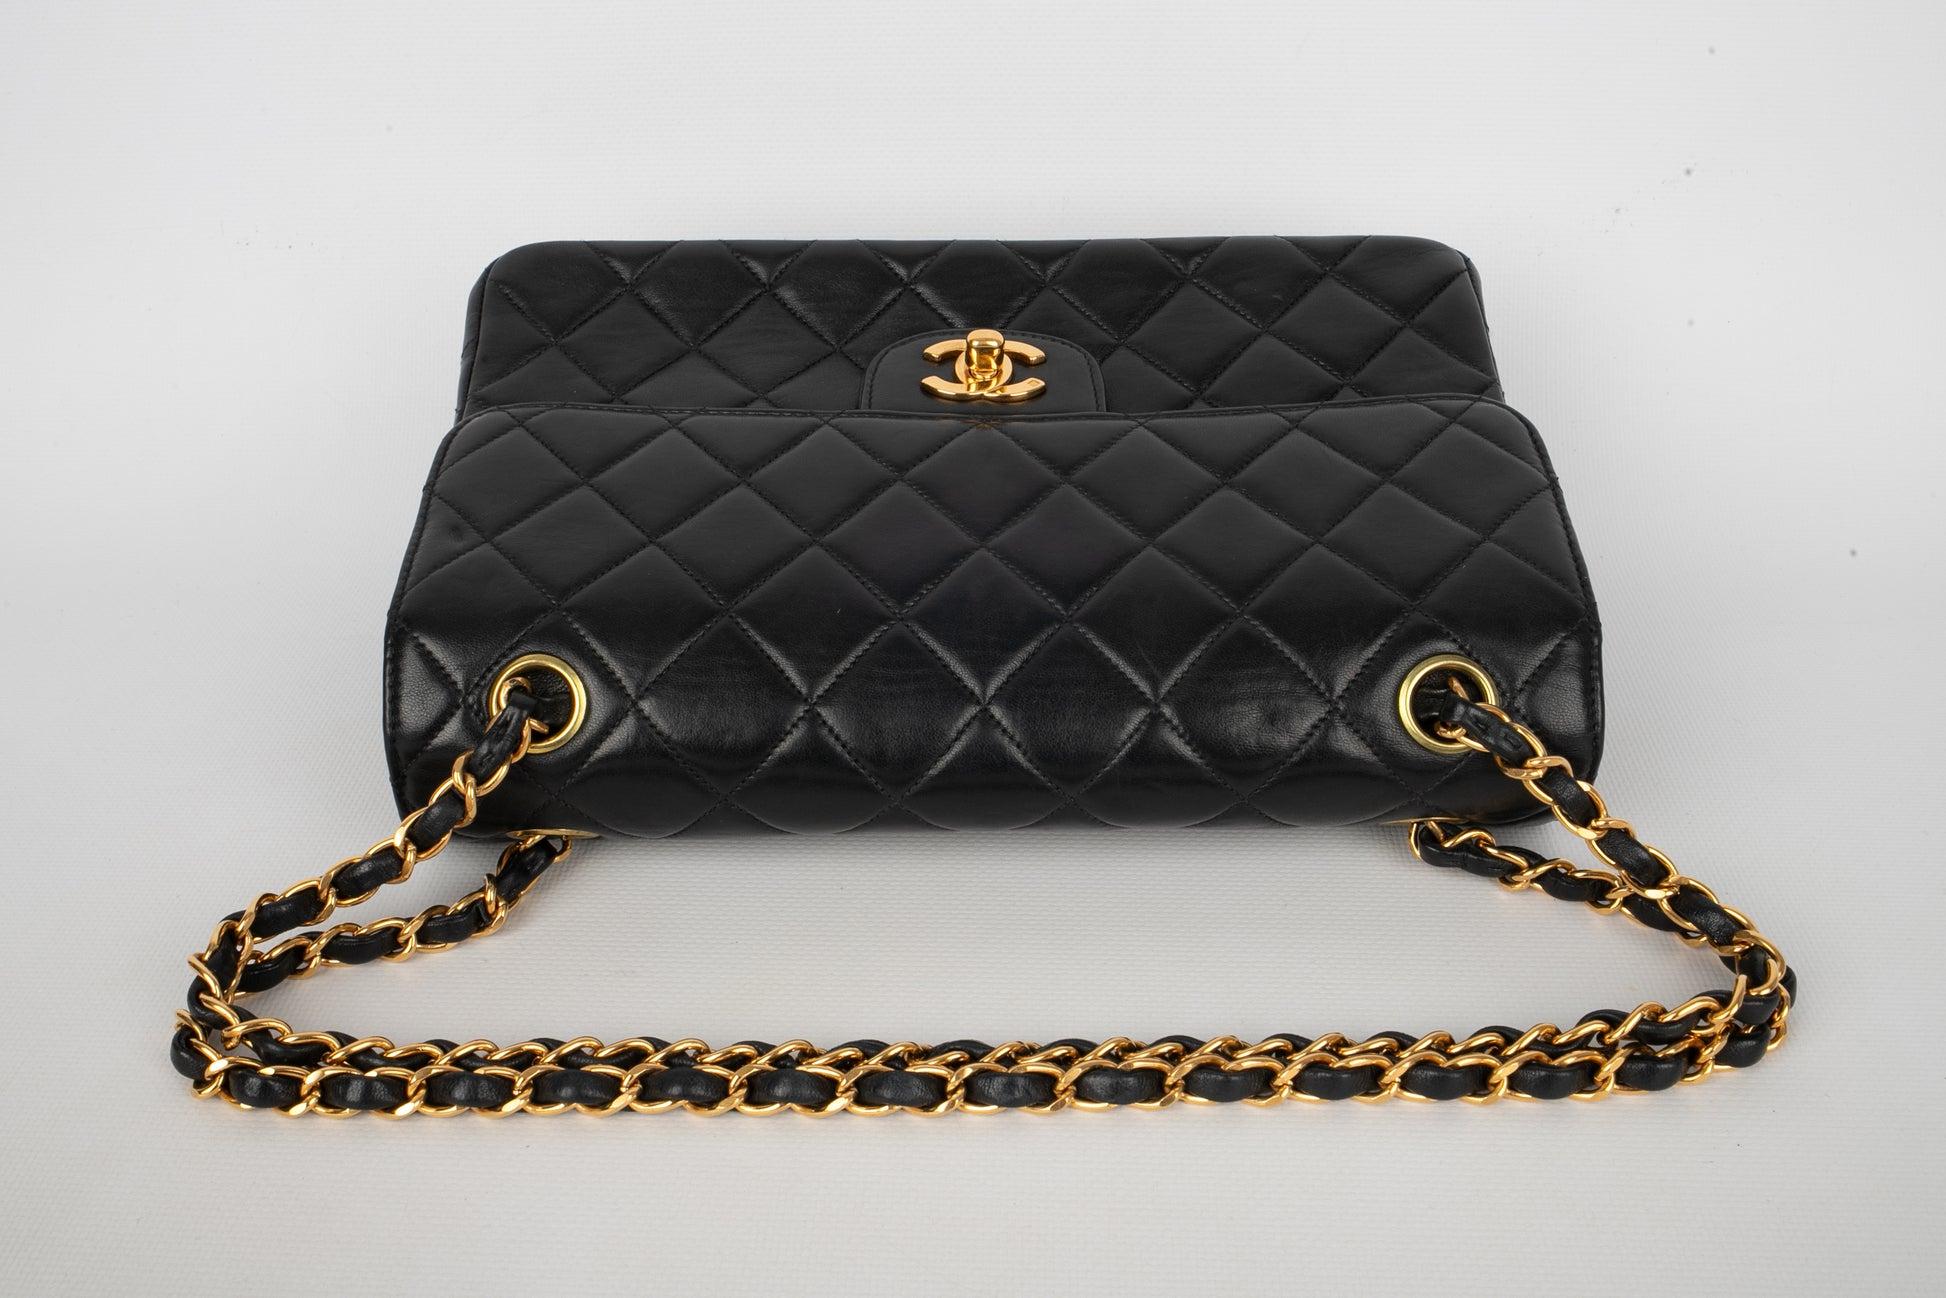 Chanel Timeless Quilted Black Leather Bag, 1996/1997 For Sale 2